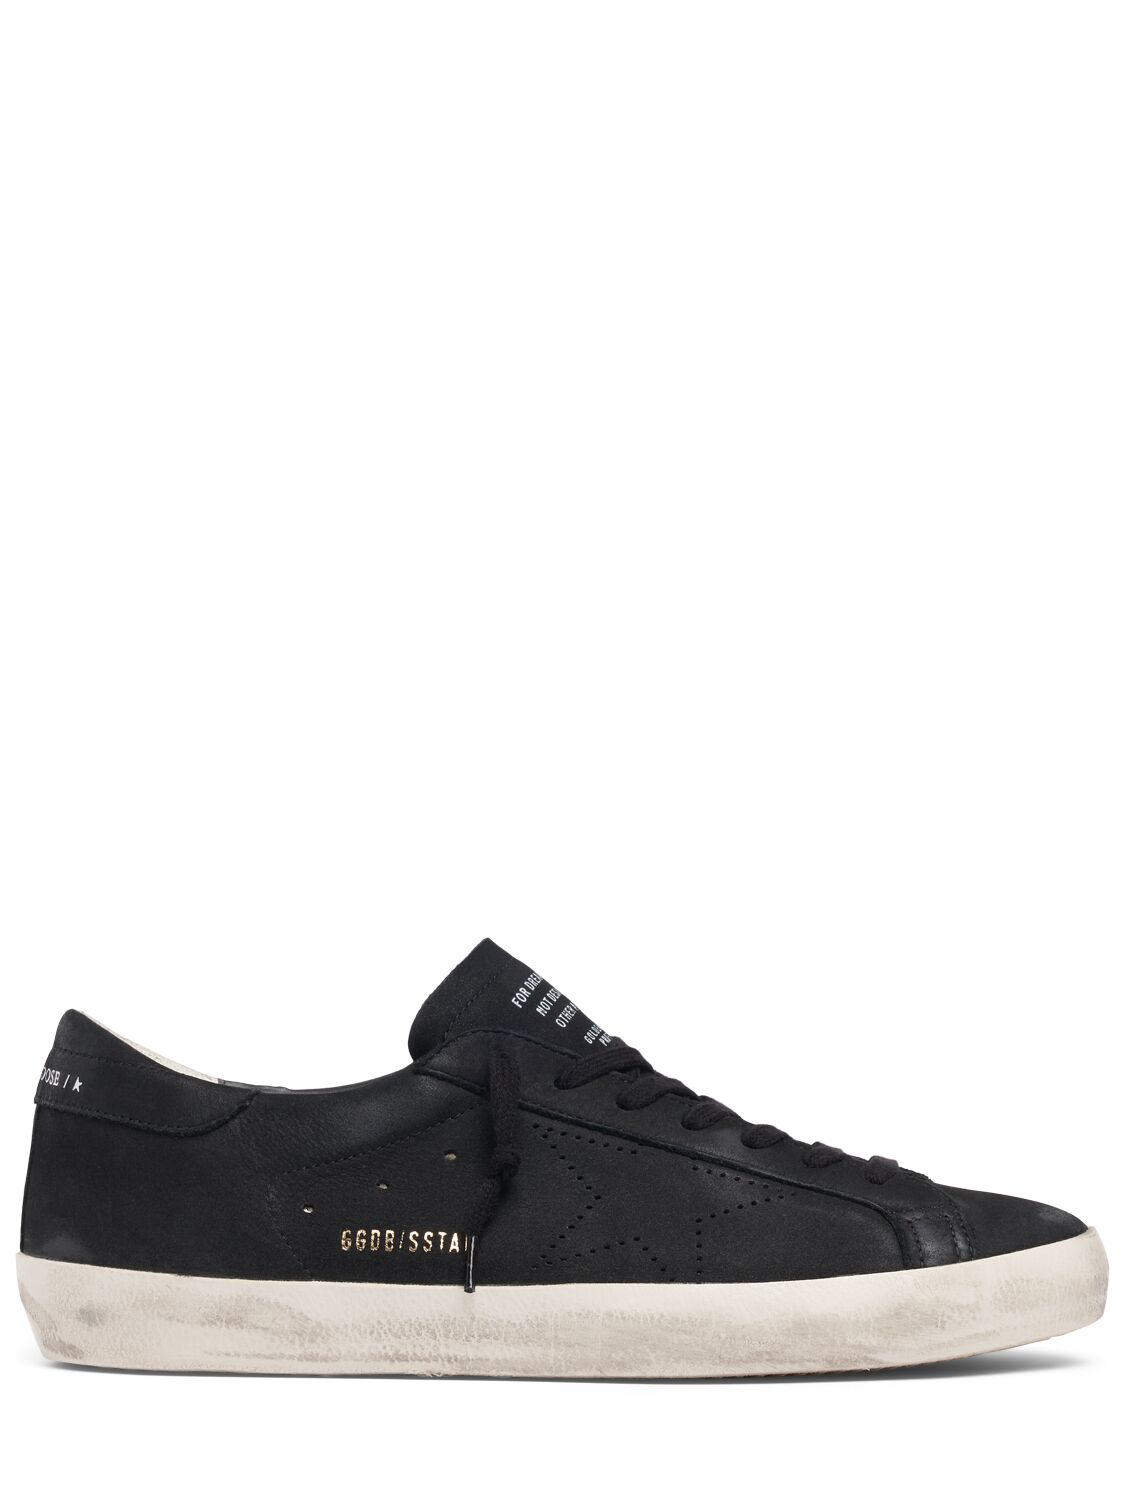 Image of Super-star Napa Leather Sneakers